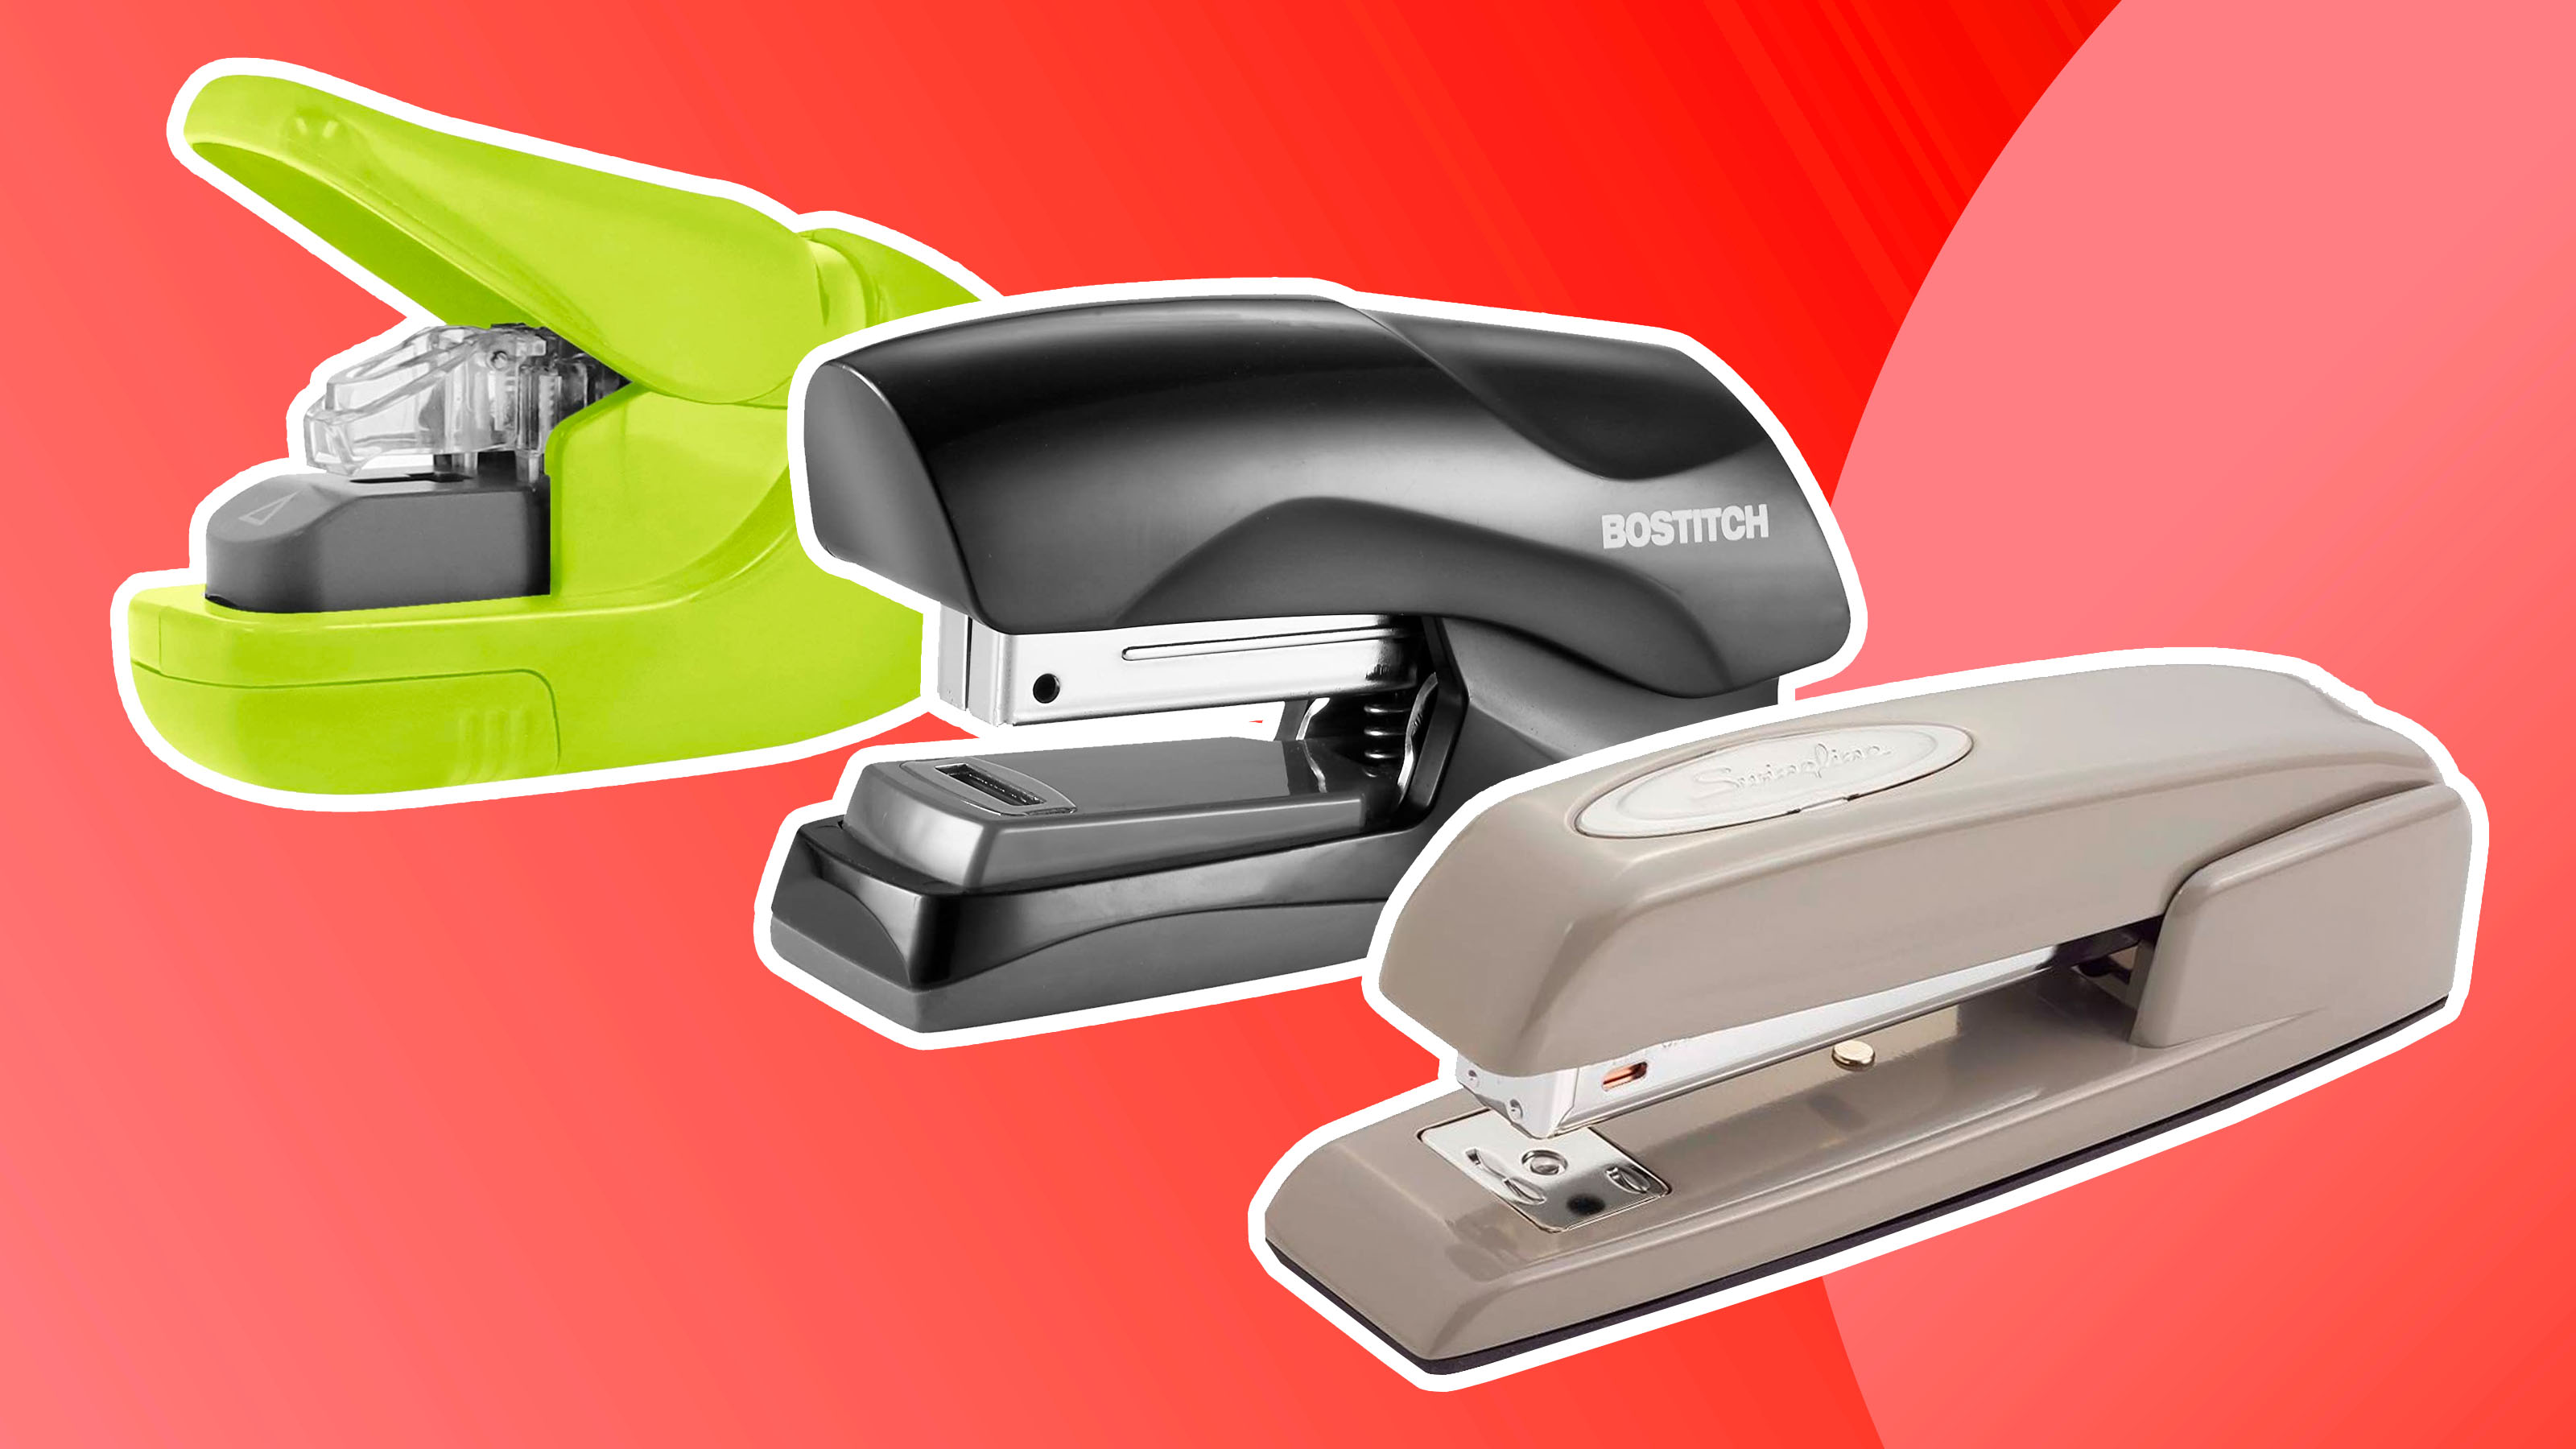 Electric Stapler Automatic Stapler Stationary School and Office